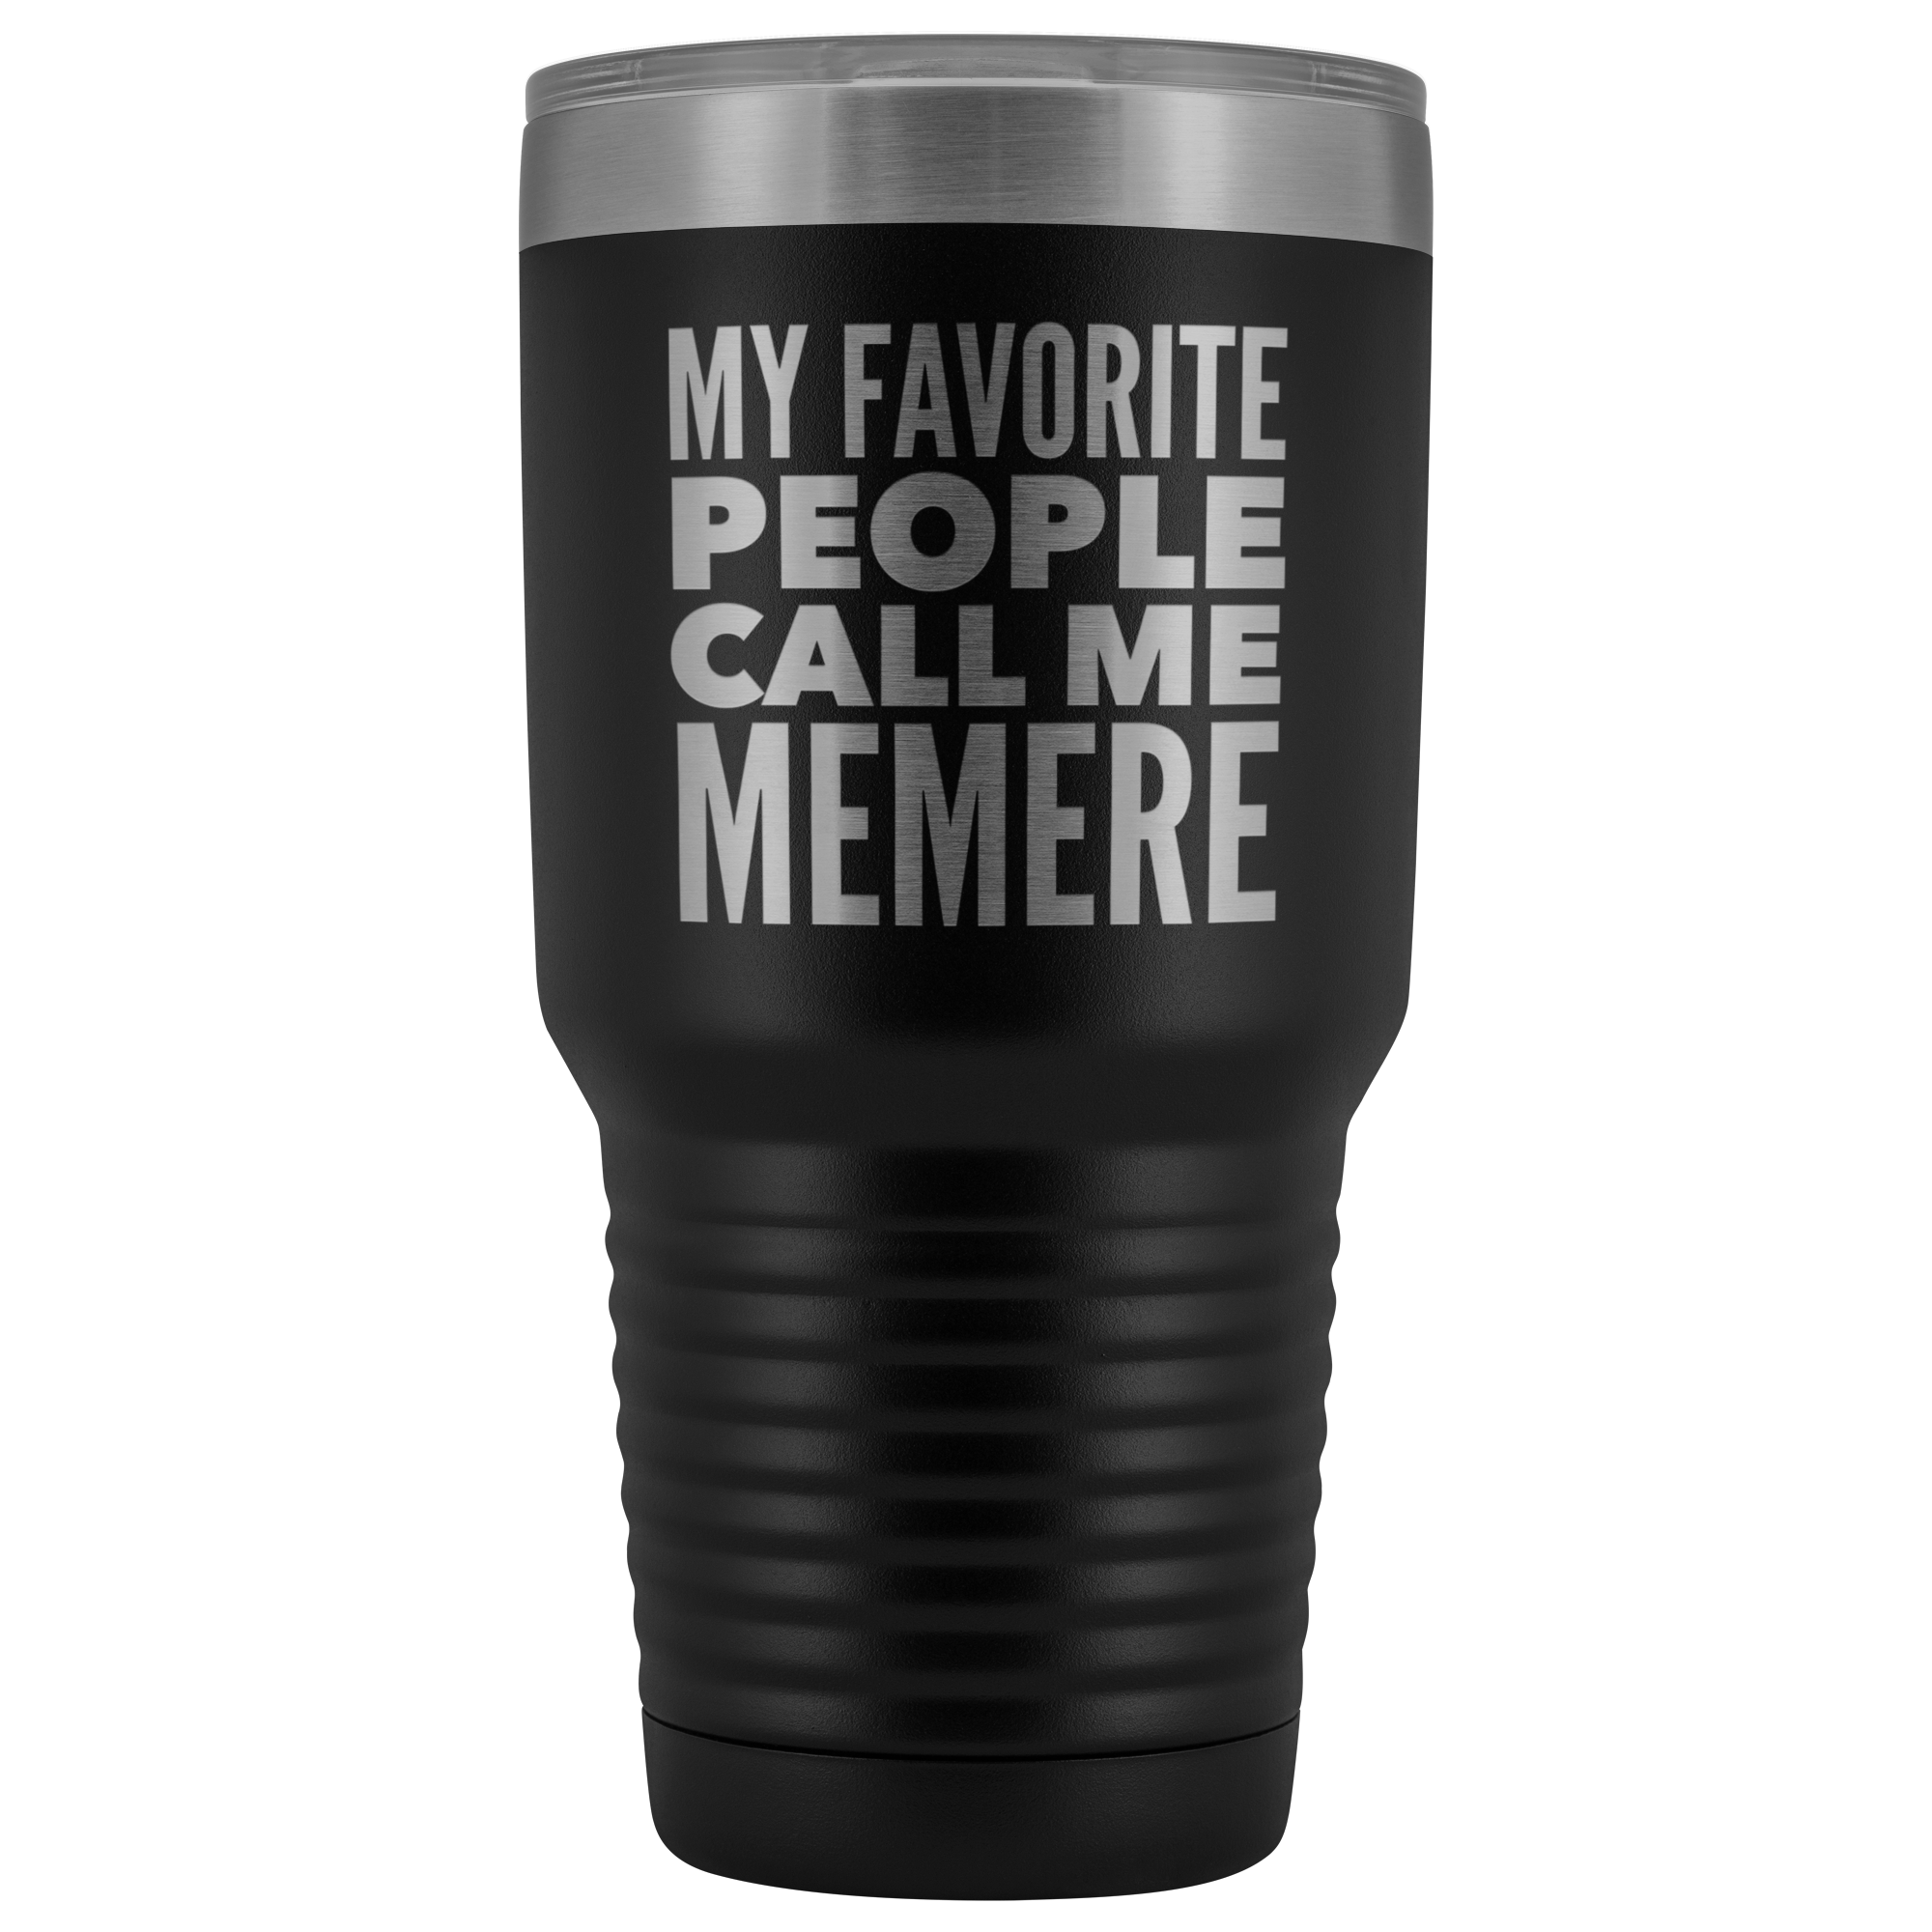 Memere Gifts My Favorite People Call Me Memere Tumbler Funny Metal Mug Double Wall Insulated Hot Cold Travel Cup 30oz BPA Free